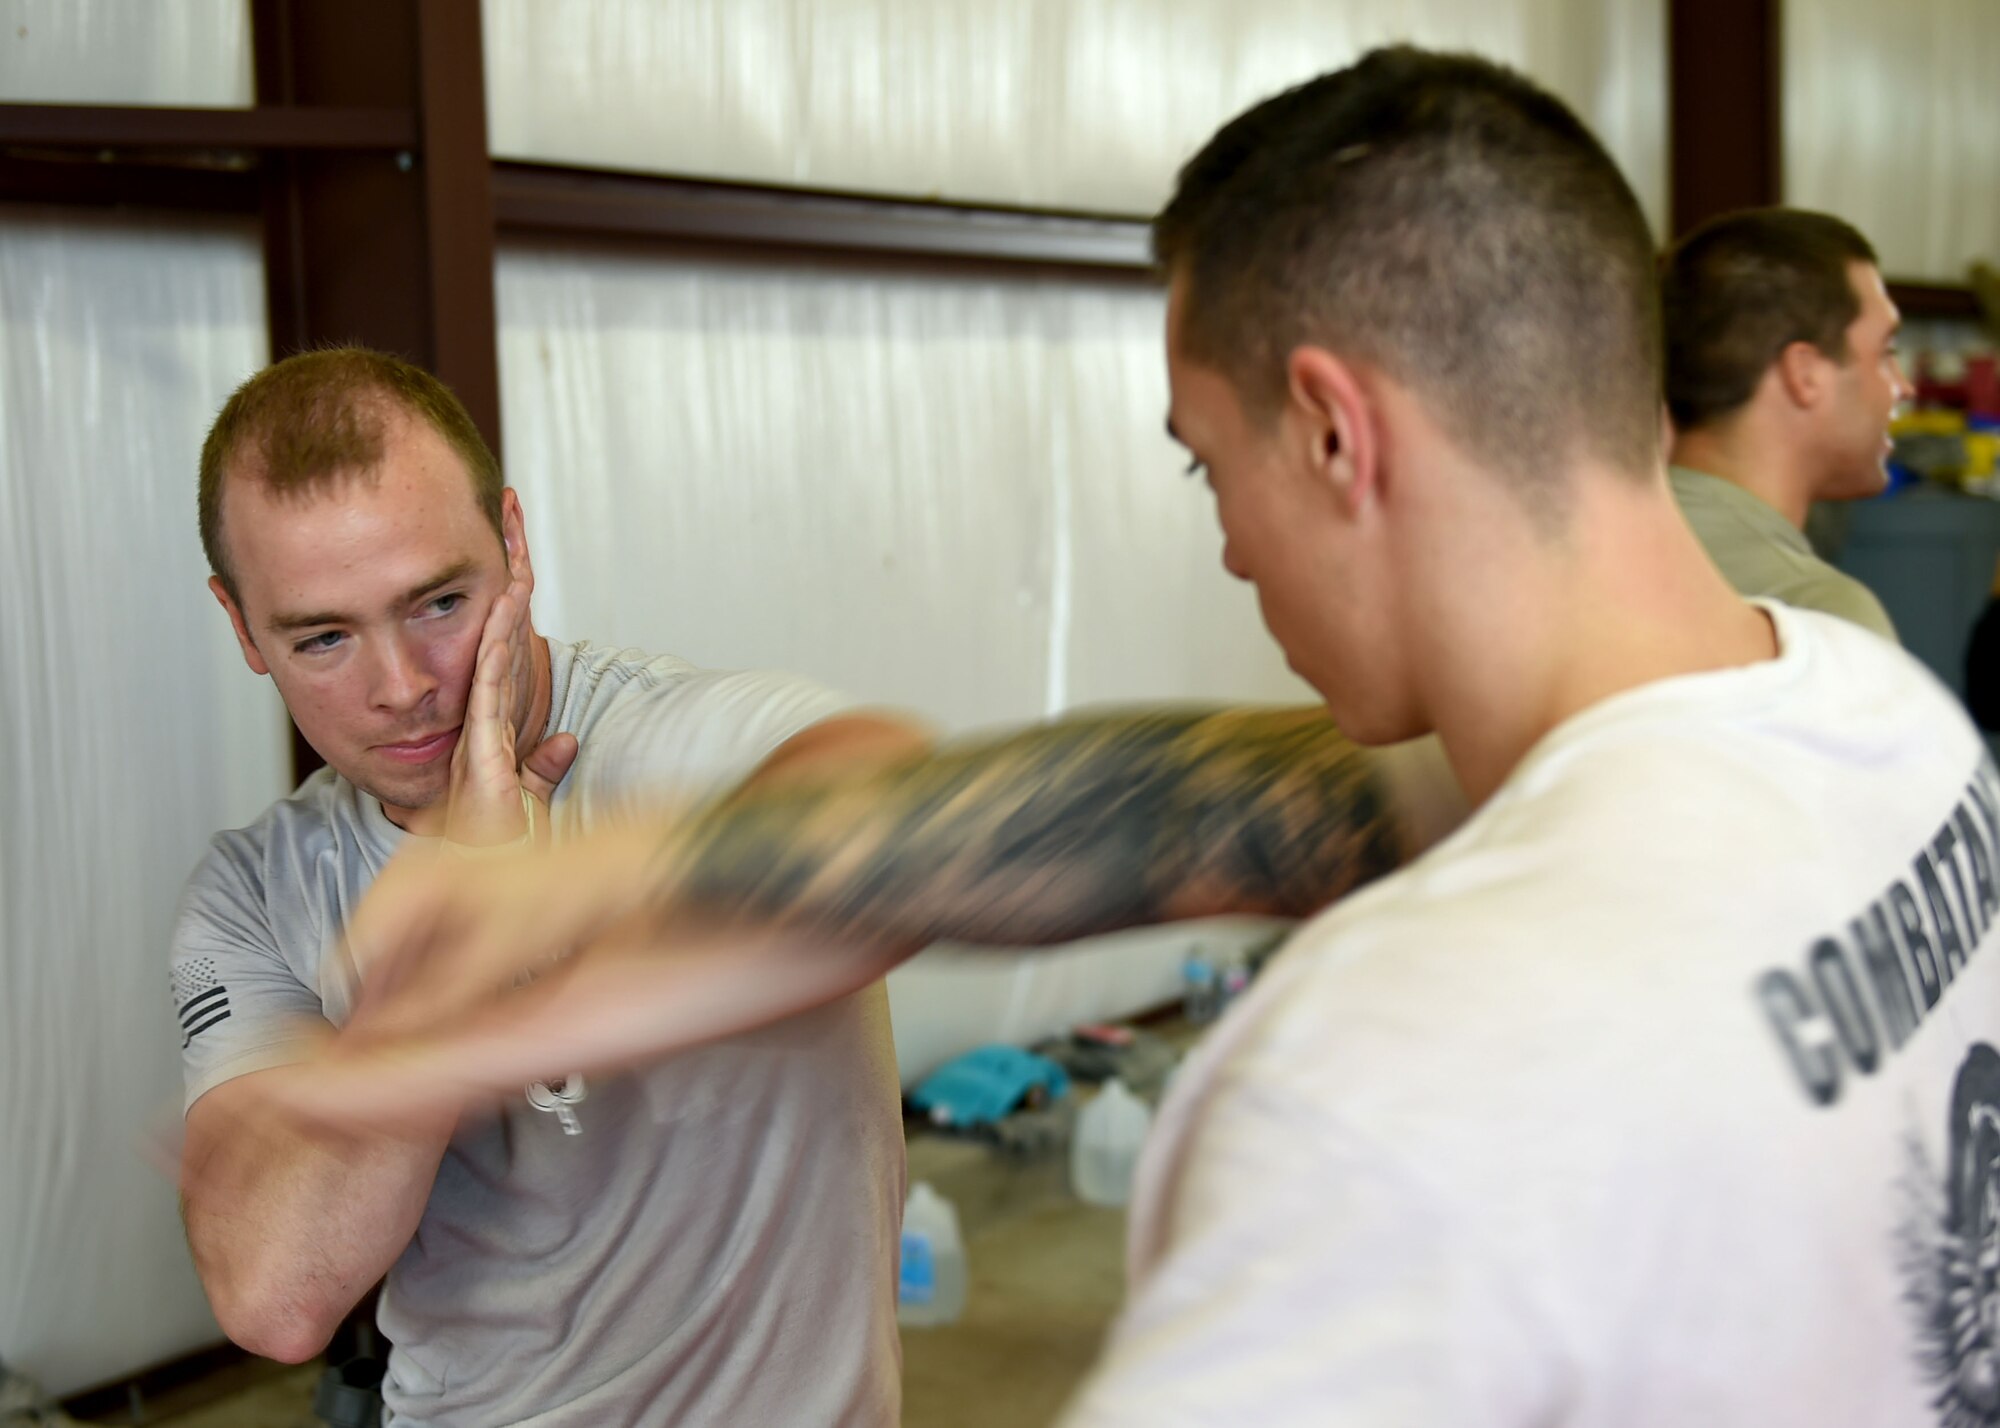 U.S. Air Force Staff Sgt. Adam Robinson, 97th Security Forces Squadron military working dog handler, blocks a punch from U.S. Air Force Senior Airman Christian Calvillo, 97 SFS combat arms instructor, on Sept. 13, 2016, Altus Air Force Base, Okla. 97th SFS Airmen participated in a week-long training course that taught hand-to-hand defensive and subduing techniques, weapons handling and clearing and securing buildings, aircraft and buses as a team. (U.S. Air Force photo by Airman 1st Class Kirby Turbak/Released)   